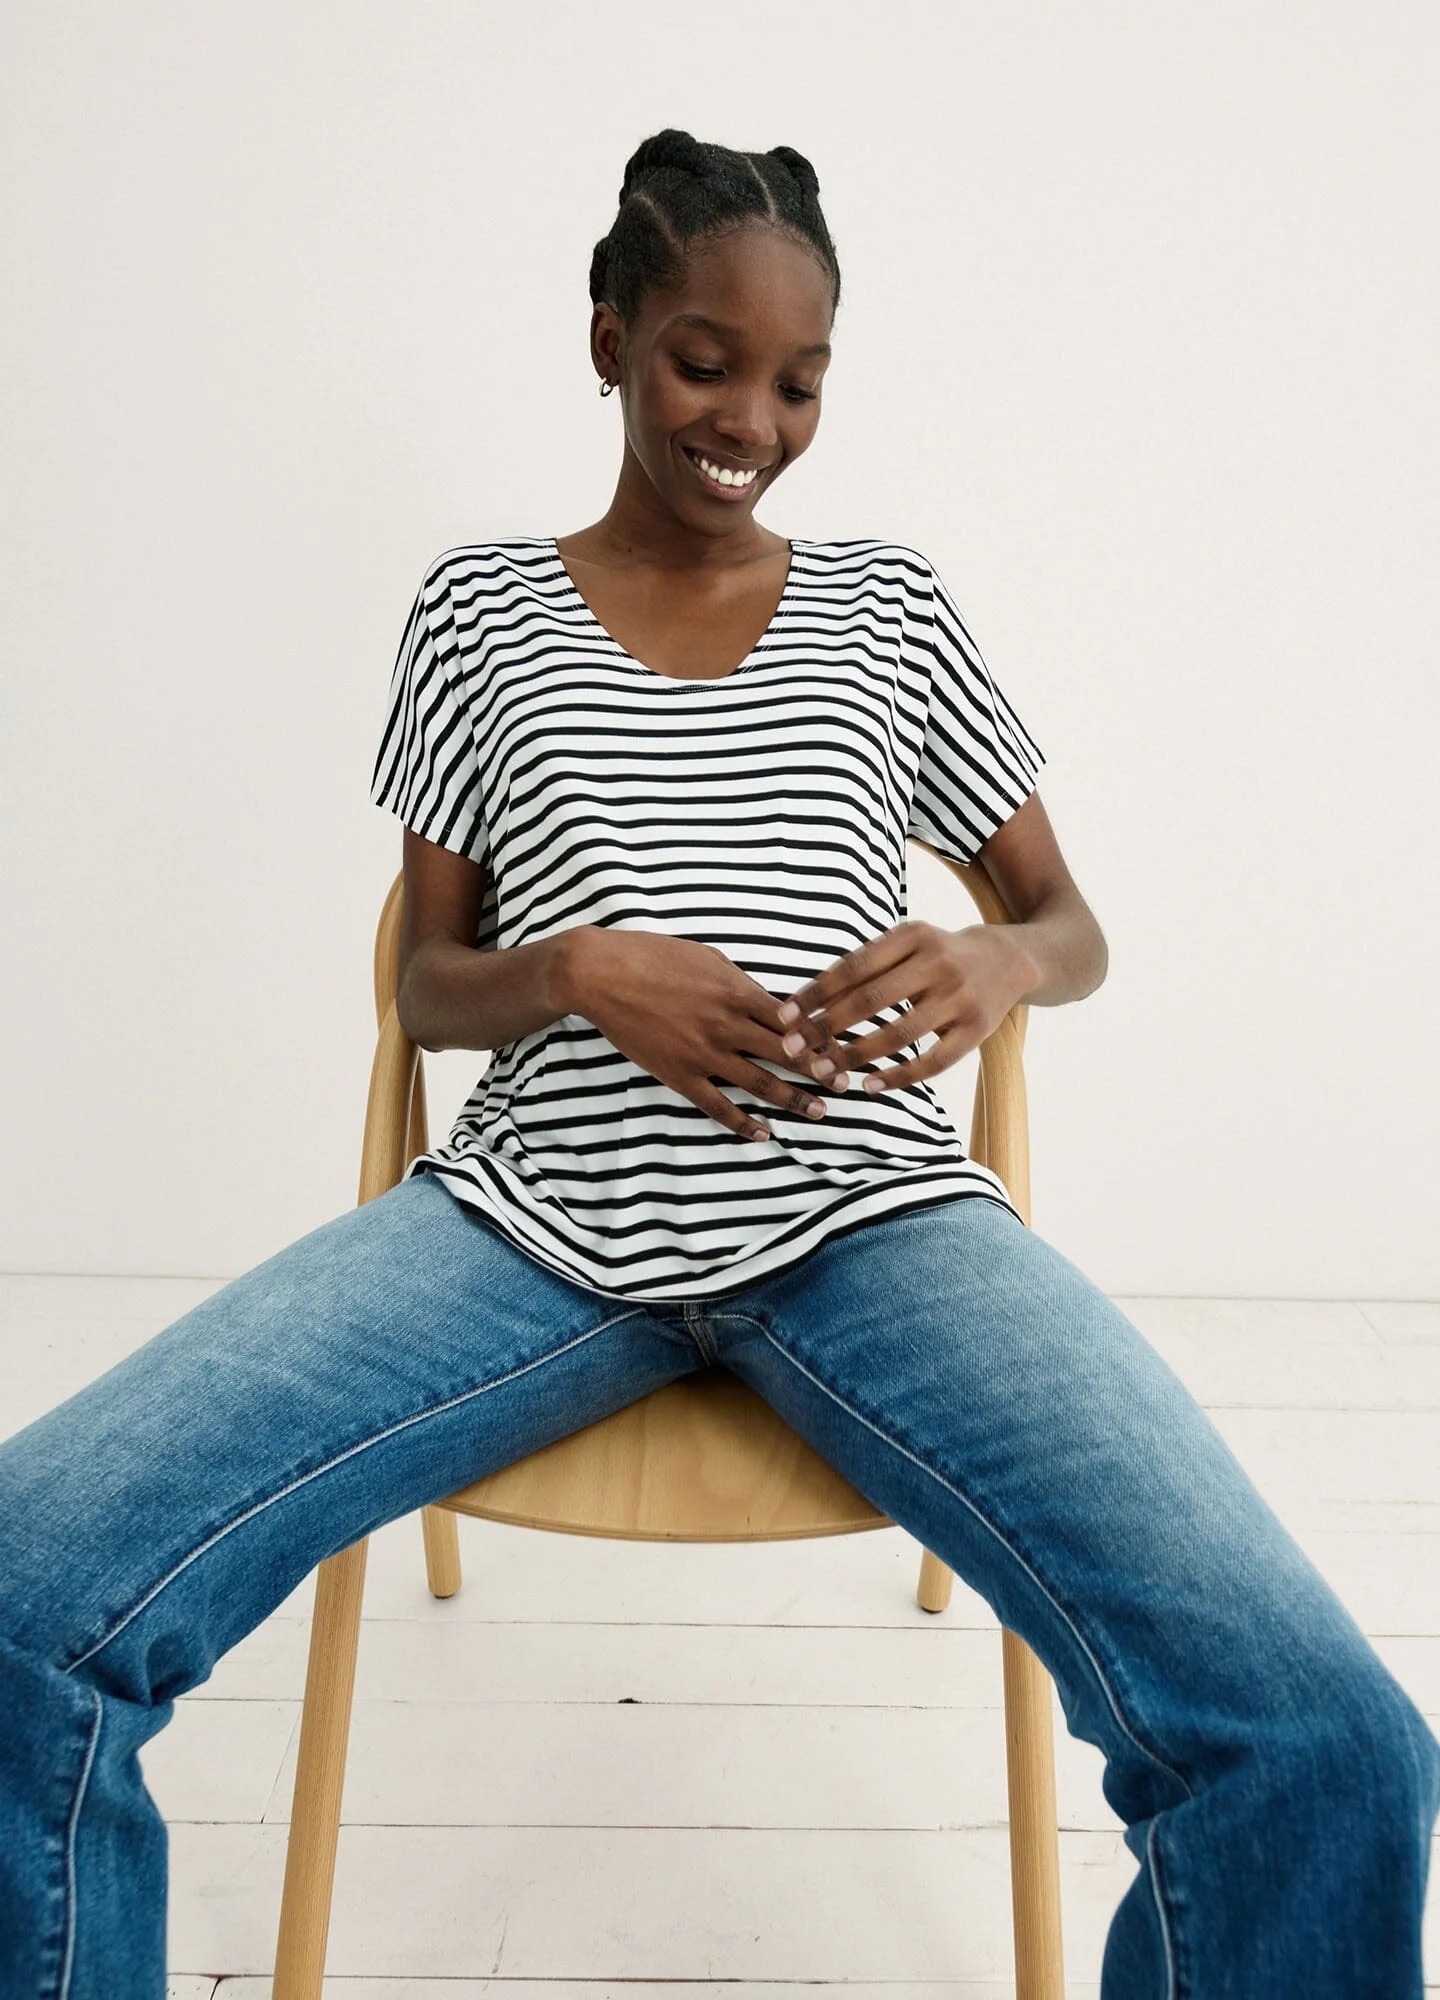 A person wearing a black and white striped shirt and blue jeans sits on a wooden chair, smiling with hands resting on their belly.